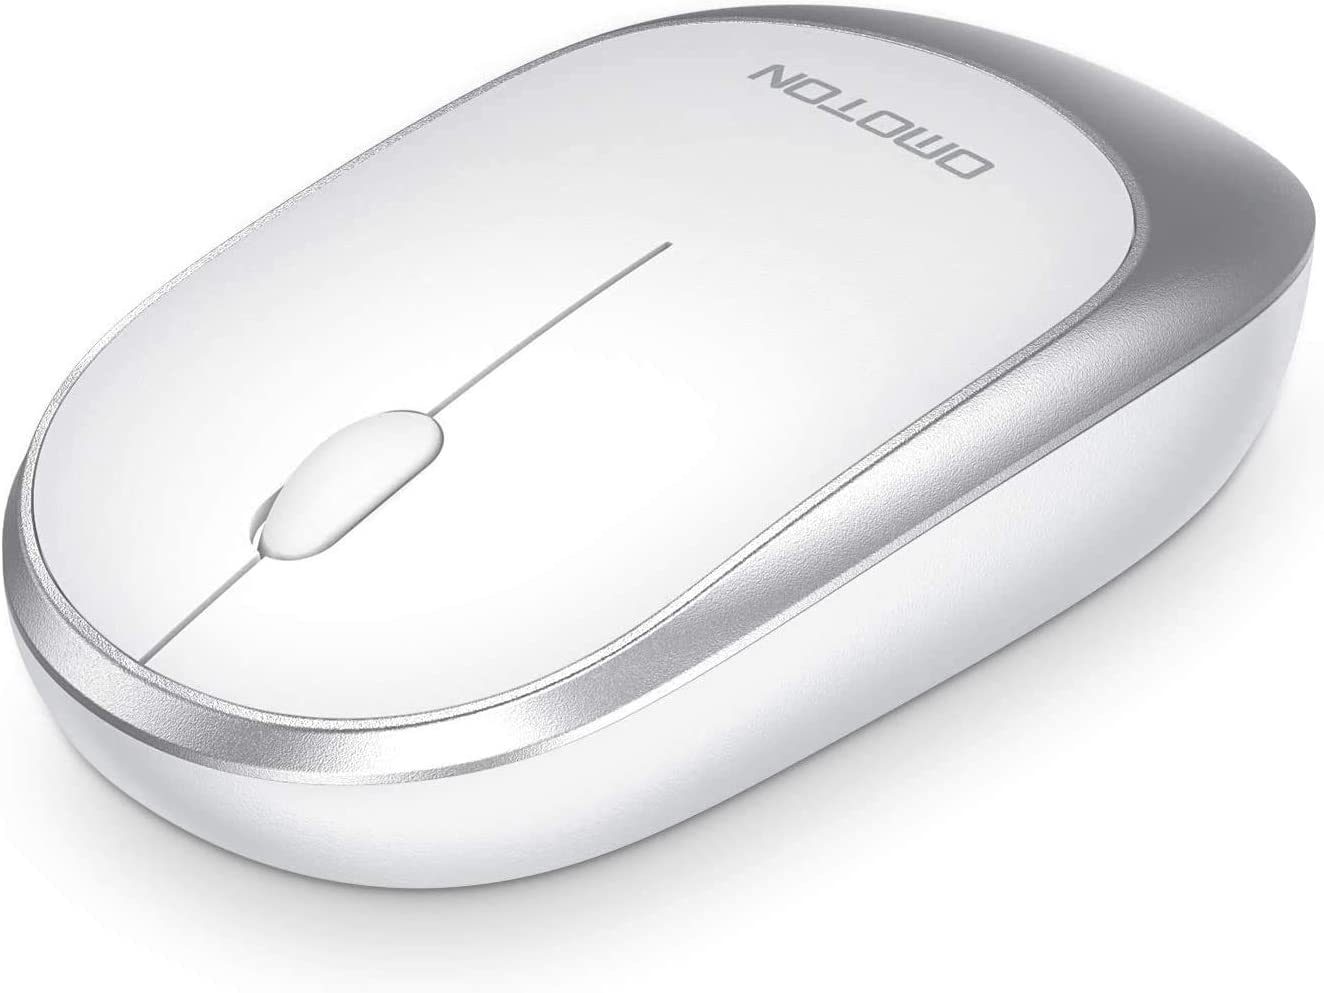 best wireless iphone app mouse for apple mac